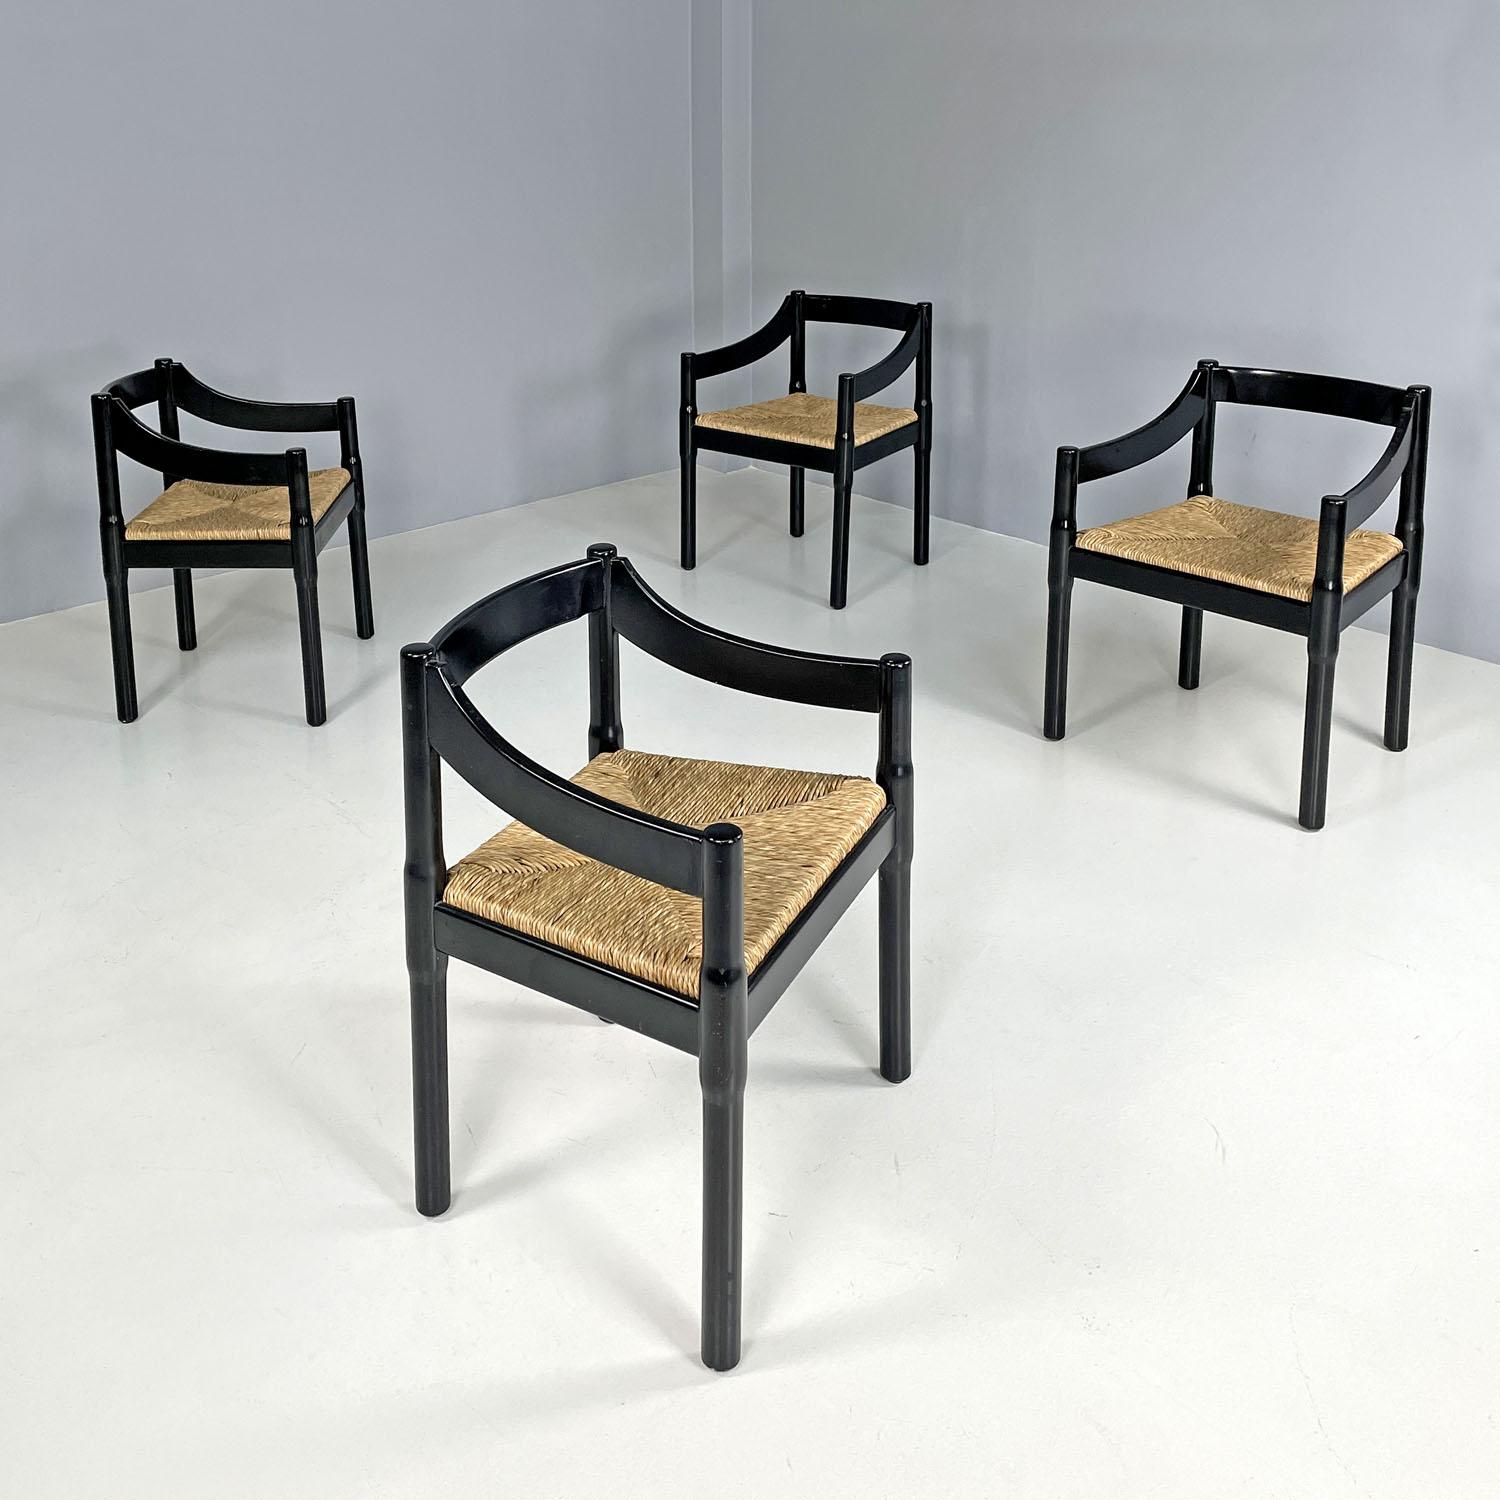 Italian modern black wood chairs Carimate by Vico Magistretti for Cassina, 1970s
Set of four chairs mod. Carimate in black lacquered wood with glossy finish and straw seat. The armrests and backrest have a rectangular section and have decorative